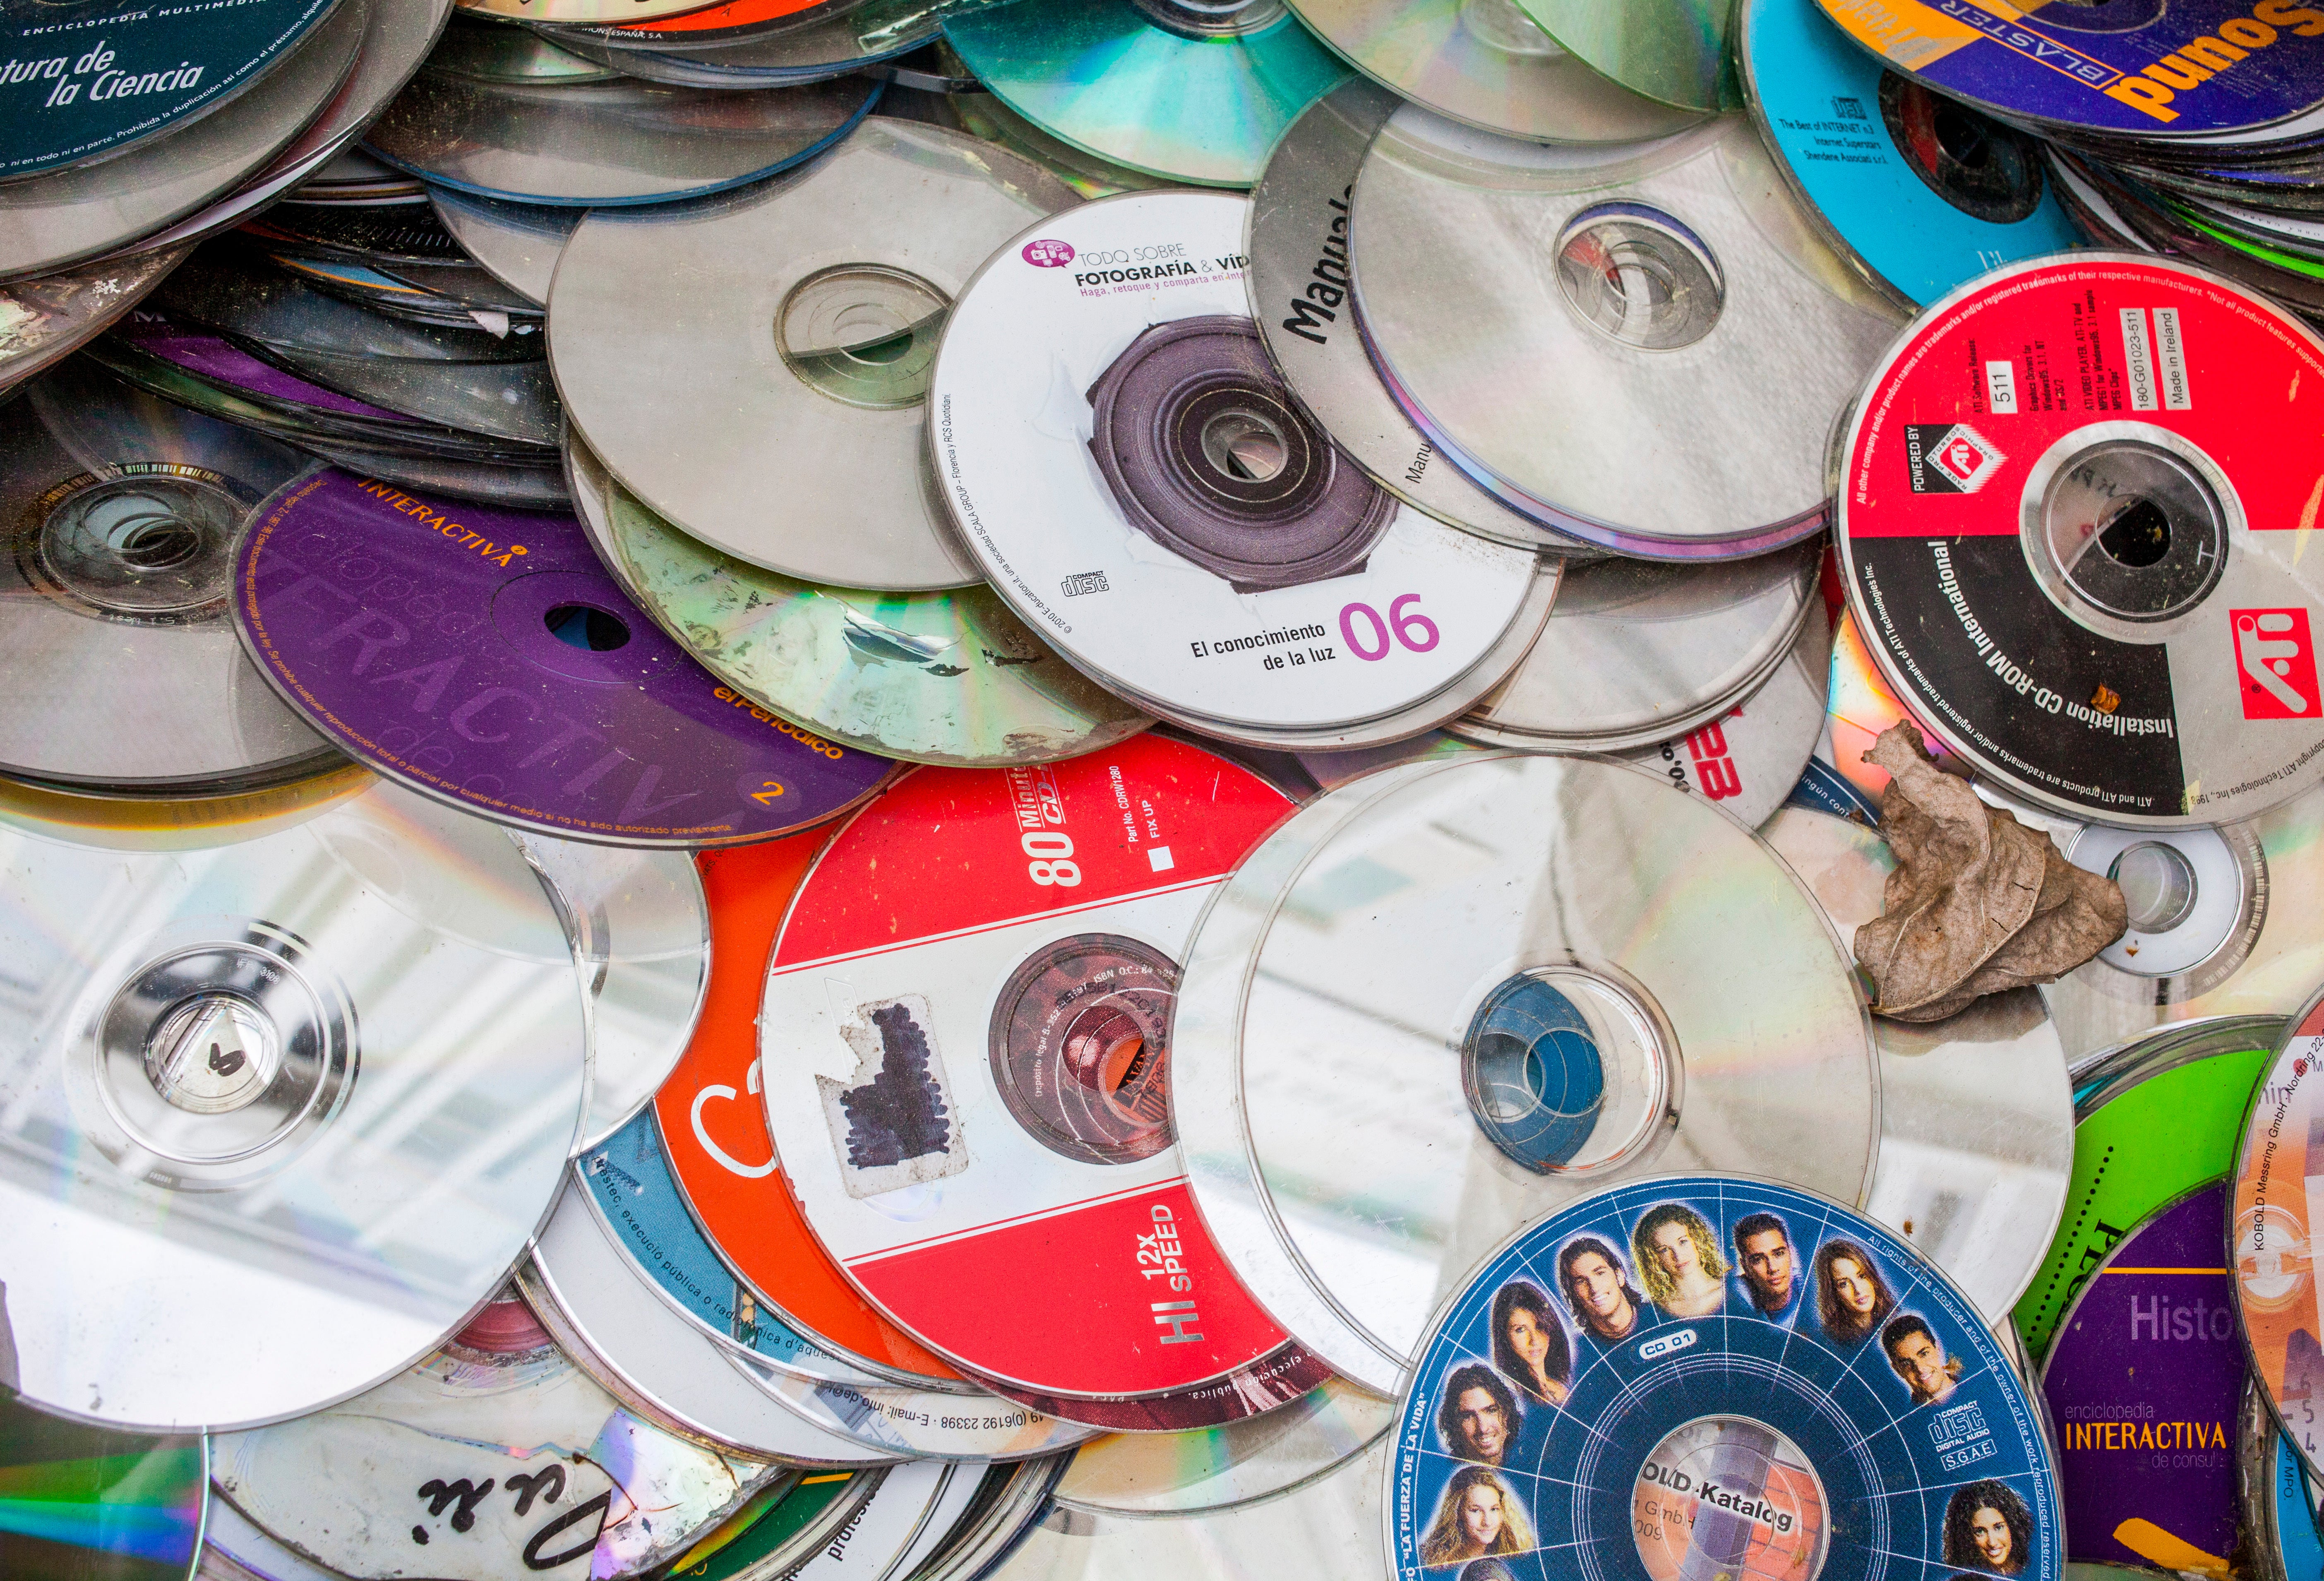 CDs are made out of this miscellaneous plastic category. (Photo: Lucas Vallecillos, AP)